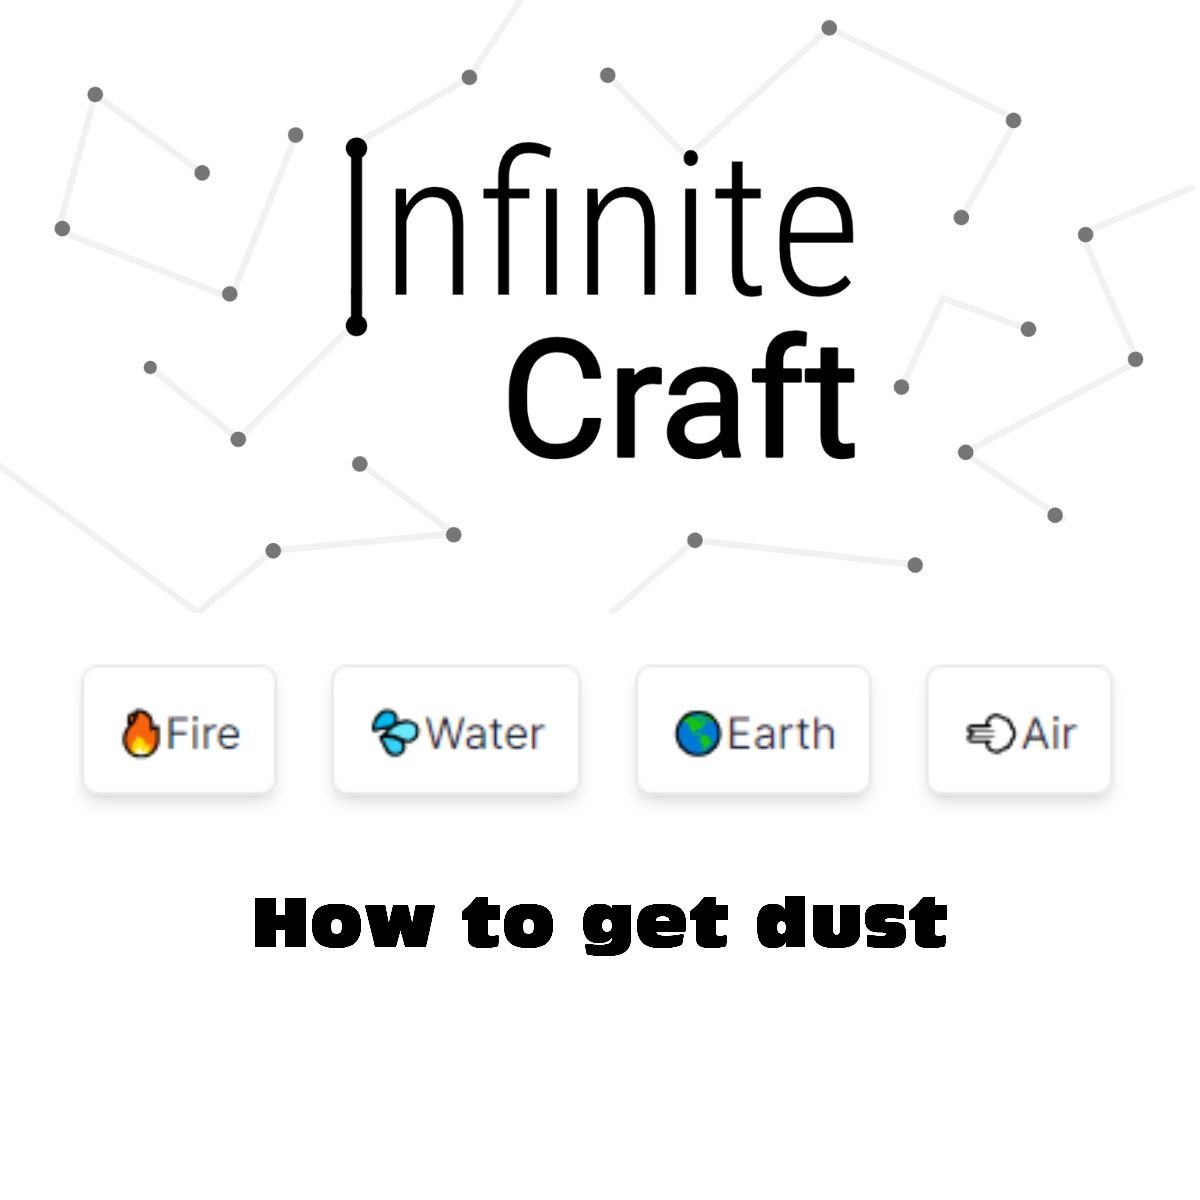 how to get dust in infinite craft